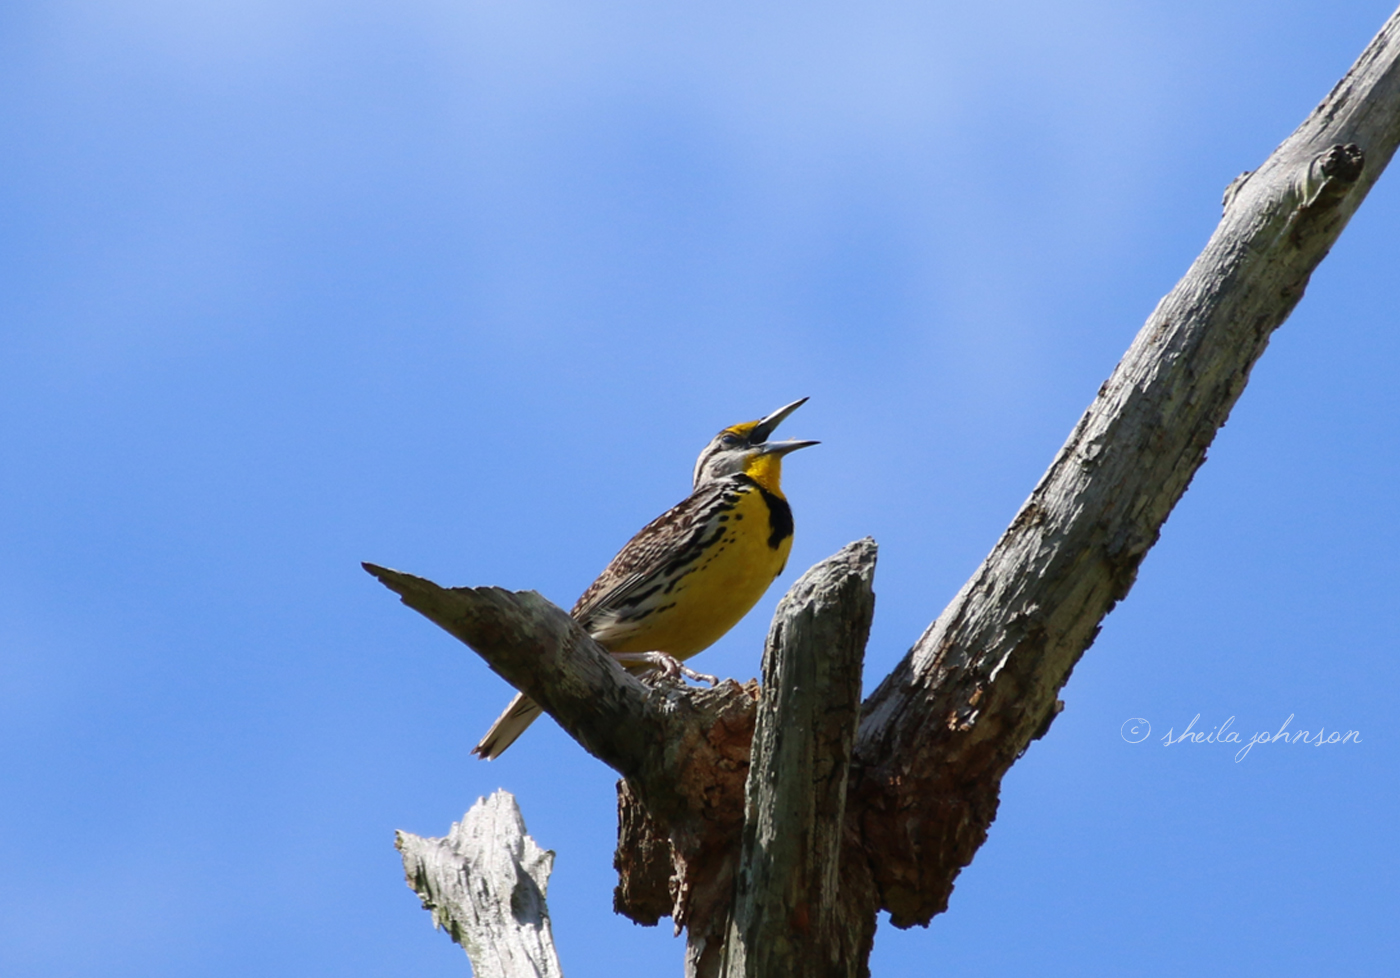 A Meadowlark Sings His Song In A Florida Meadow. The Meadowlark Is The Most Flamboyant Member Of The Member Of The Blackbird Family, With Its Bright Yellow Feathers And Melodic Call.